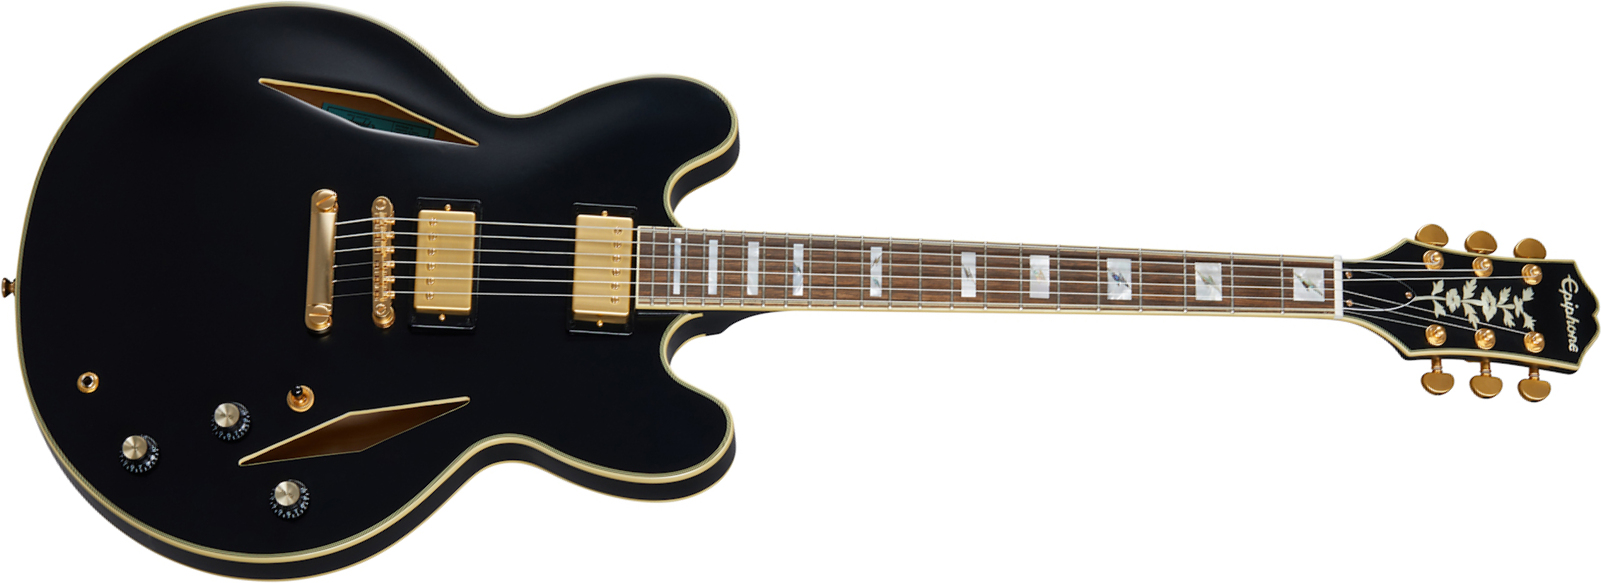 Epiphone Emily Wolfe Sheraton Stealth 2h Ht Lau - Black Aged - Semi-hollow electric guitar - Main picture